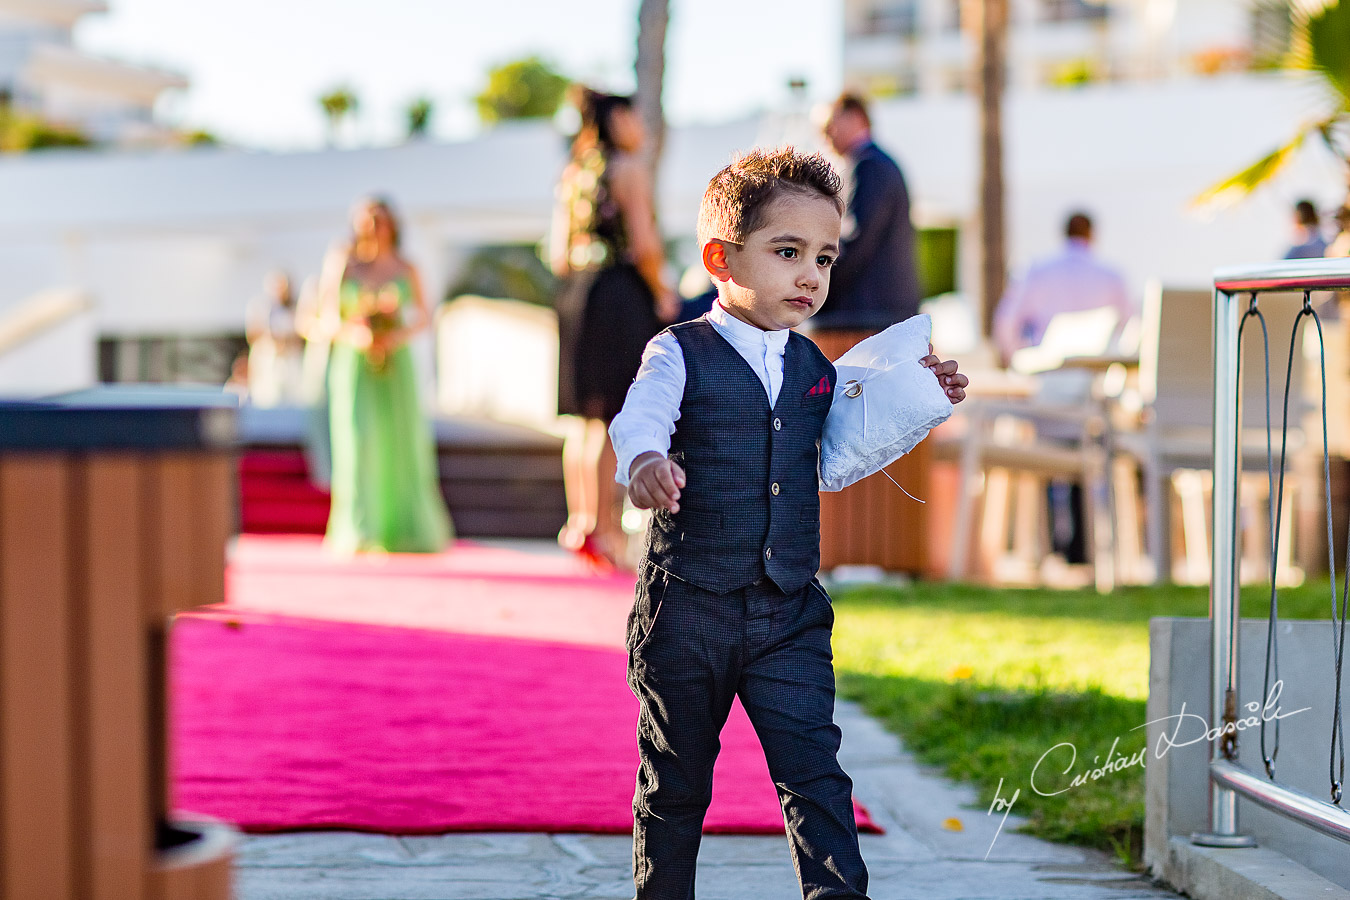 Paige boy photographed during the ceremony, as part of an Exclusive Wedding photography at Grand Resort Limassol, captured by Cyprus Wedding Photographer Cristian Dascalu.